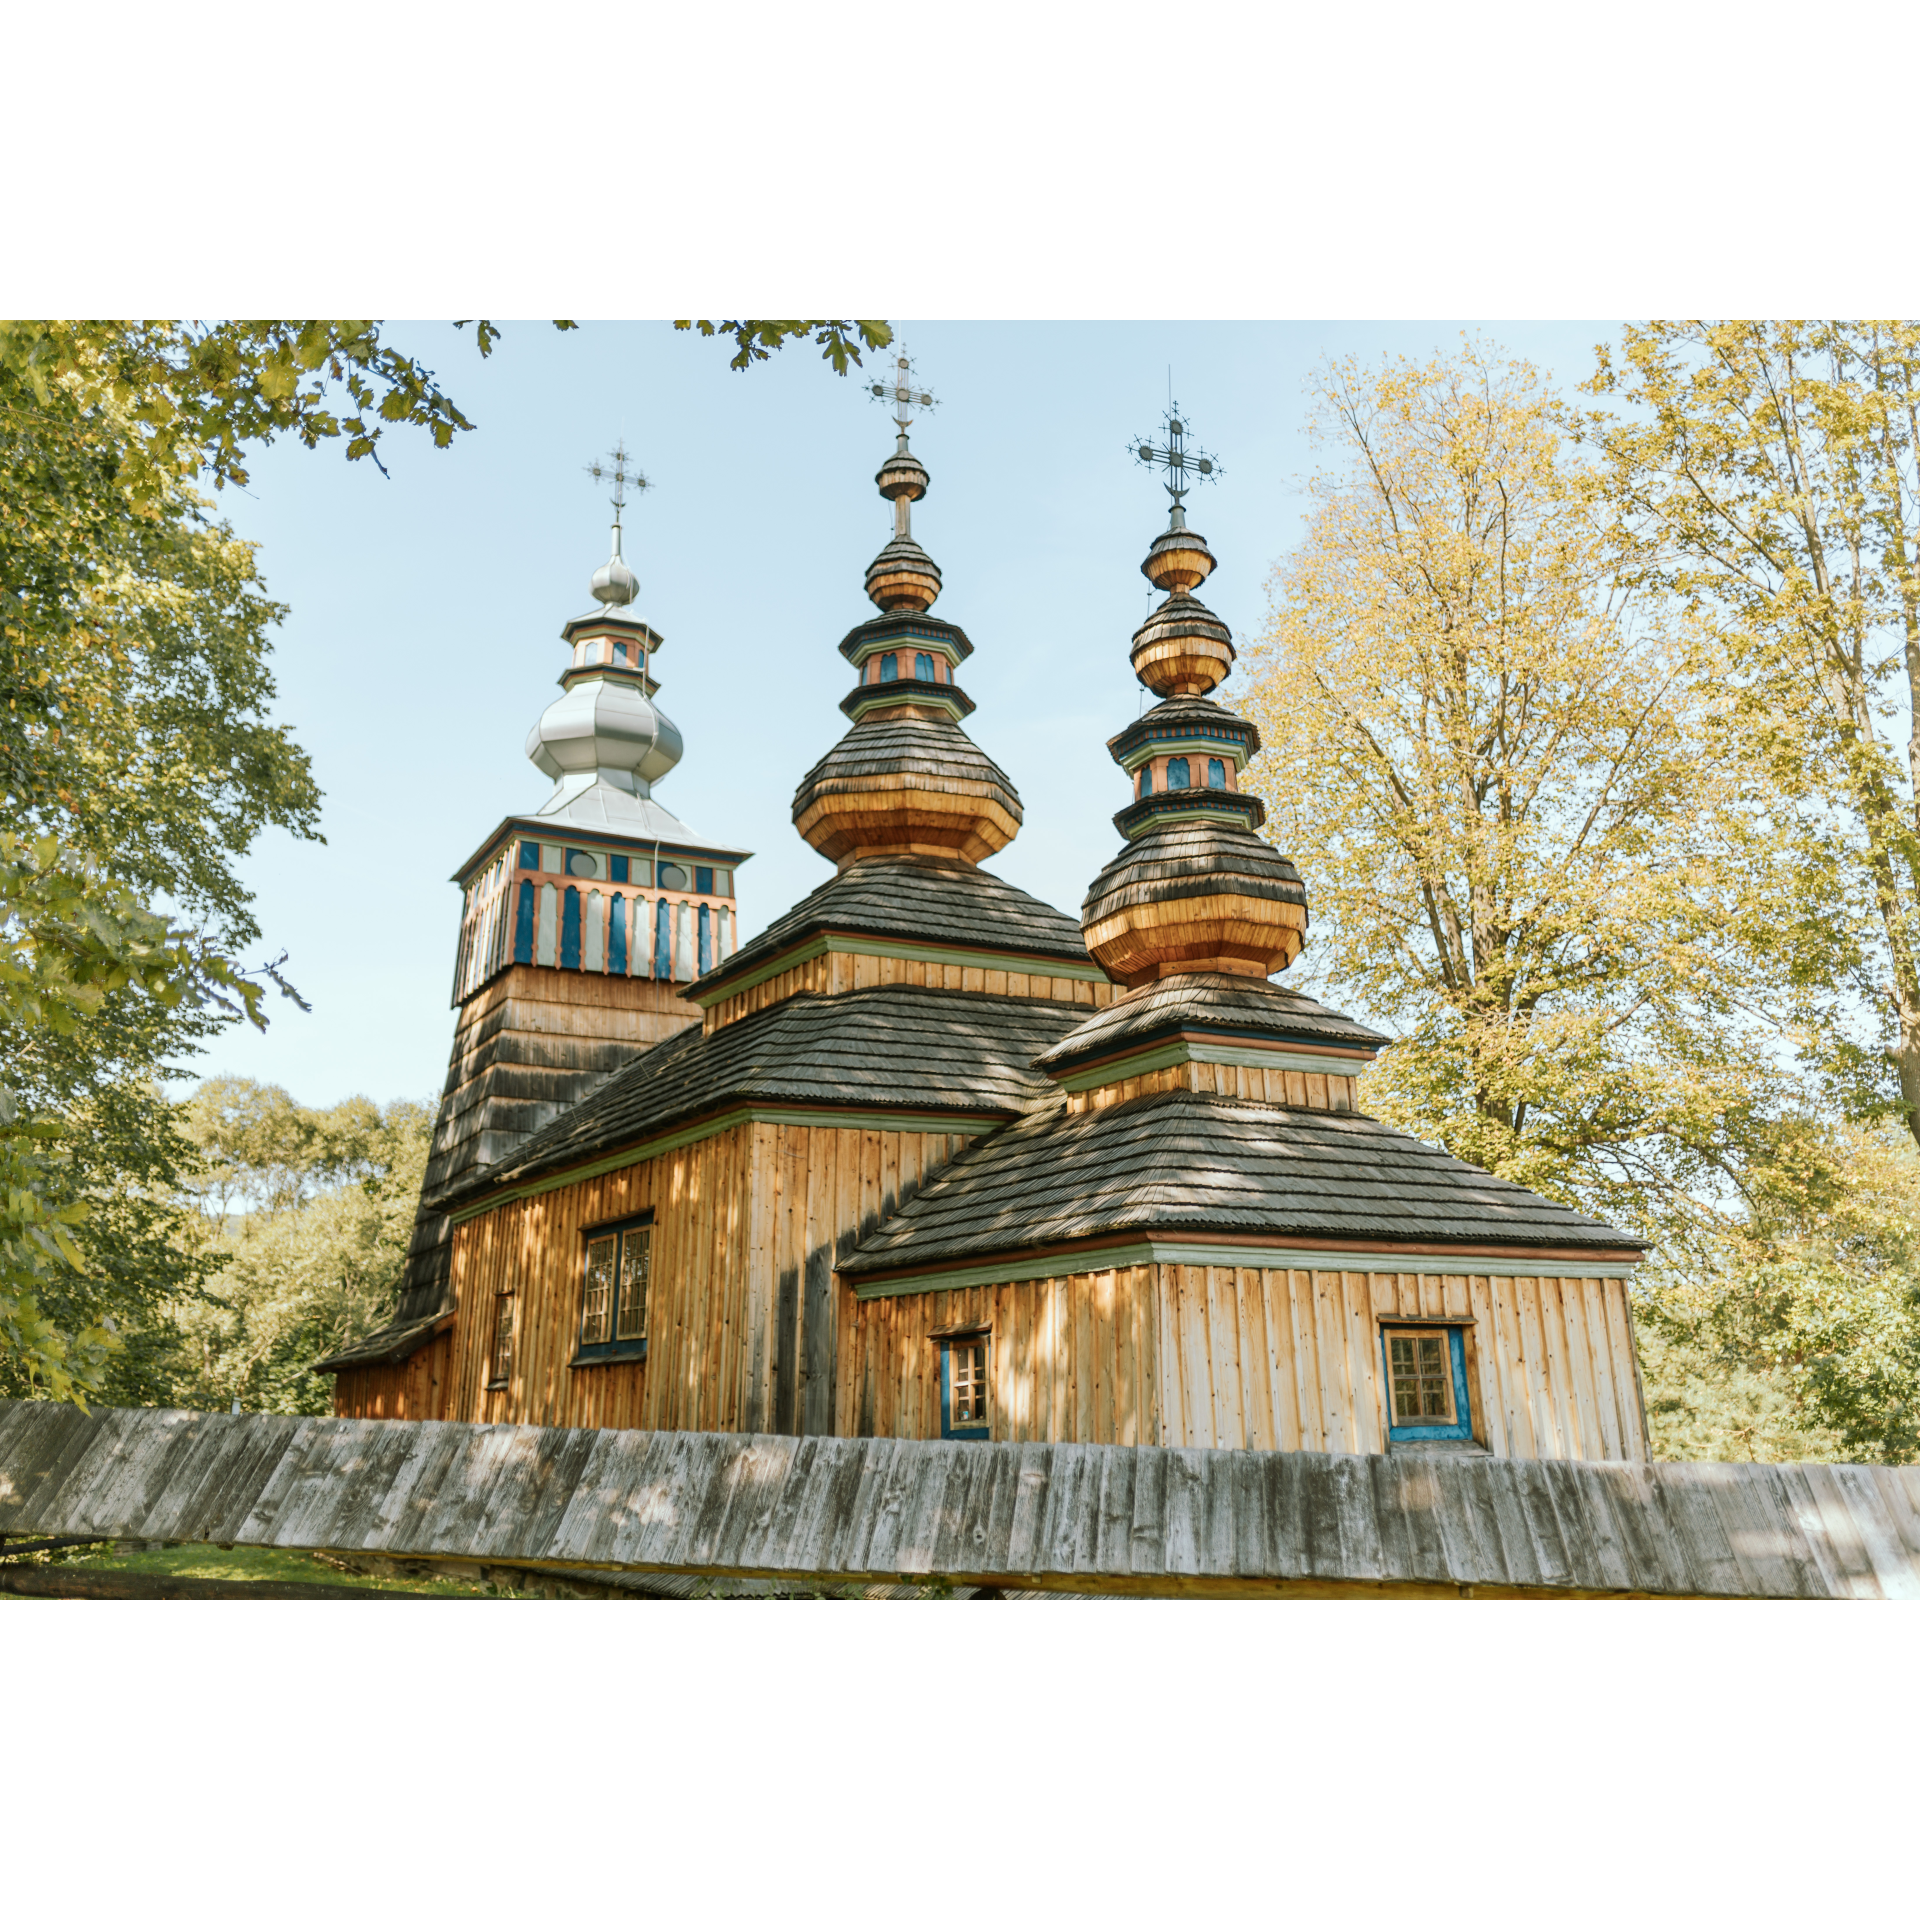 A three-part wooden church, with each part topped with a dome, hipped roofs and a tower with a pillar structure